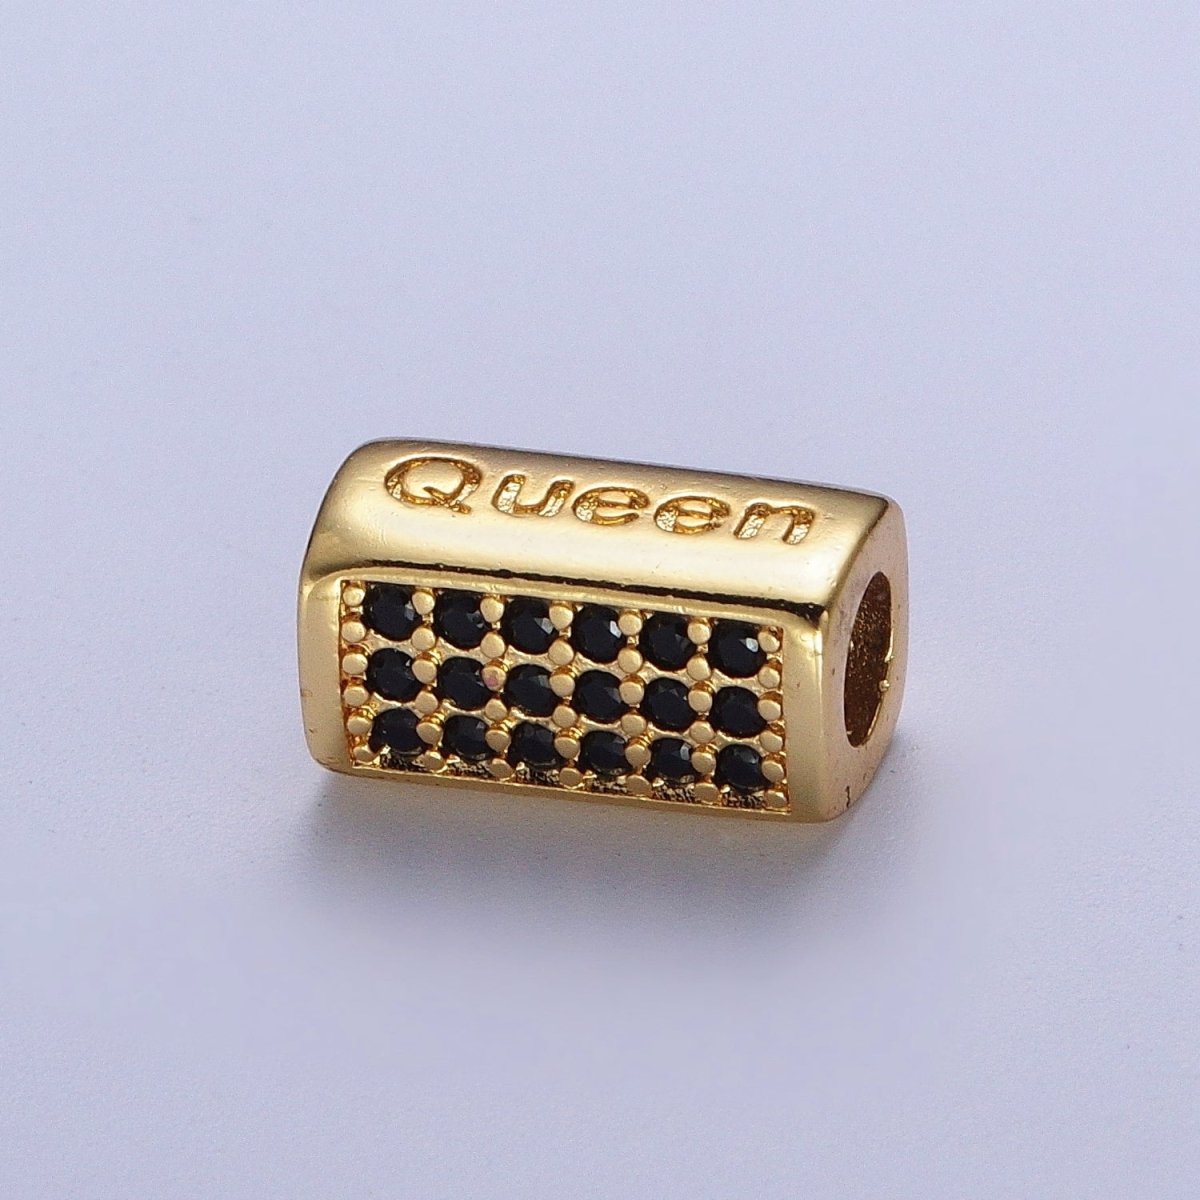 Black Micro Paved CZ Rectangular Bead with "Queen" Script Engraved in Gold & Silver, Jewelry Supply Making | B-936 B-647 - DLUXCA